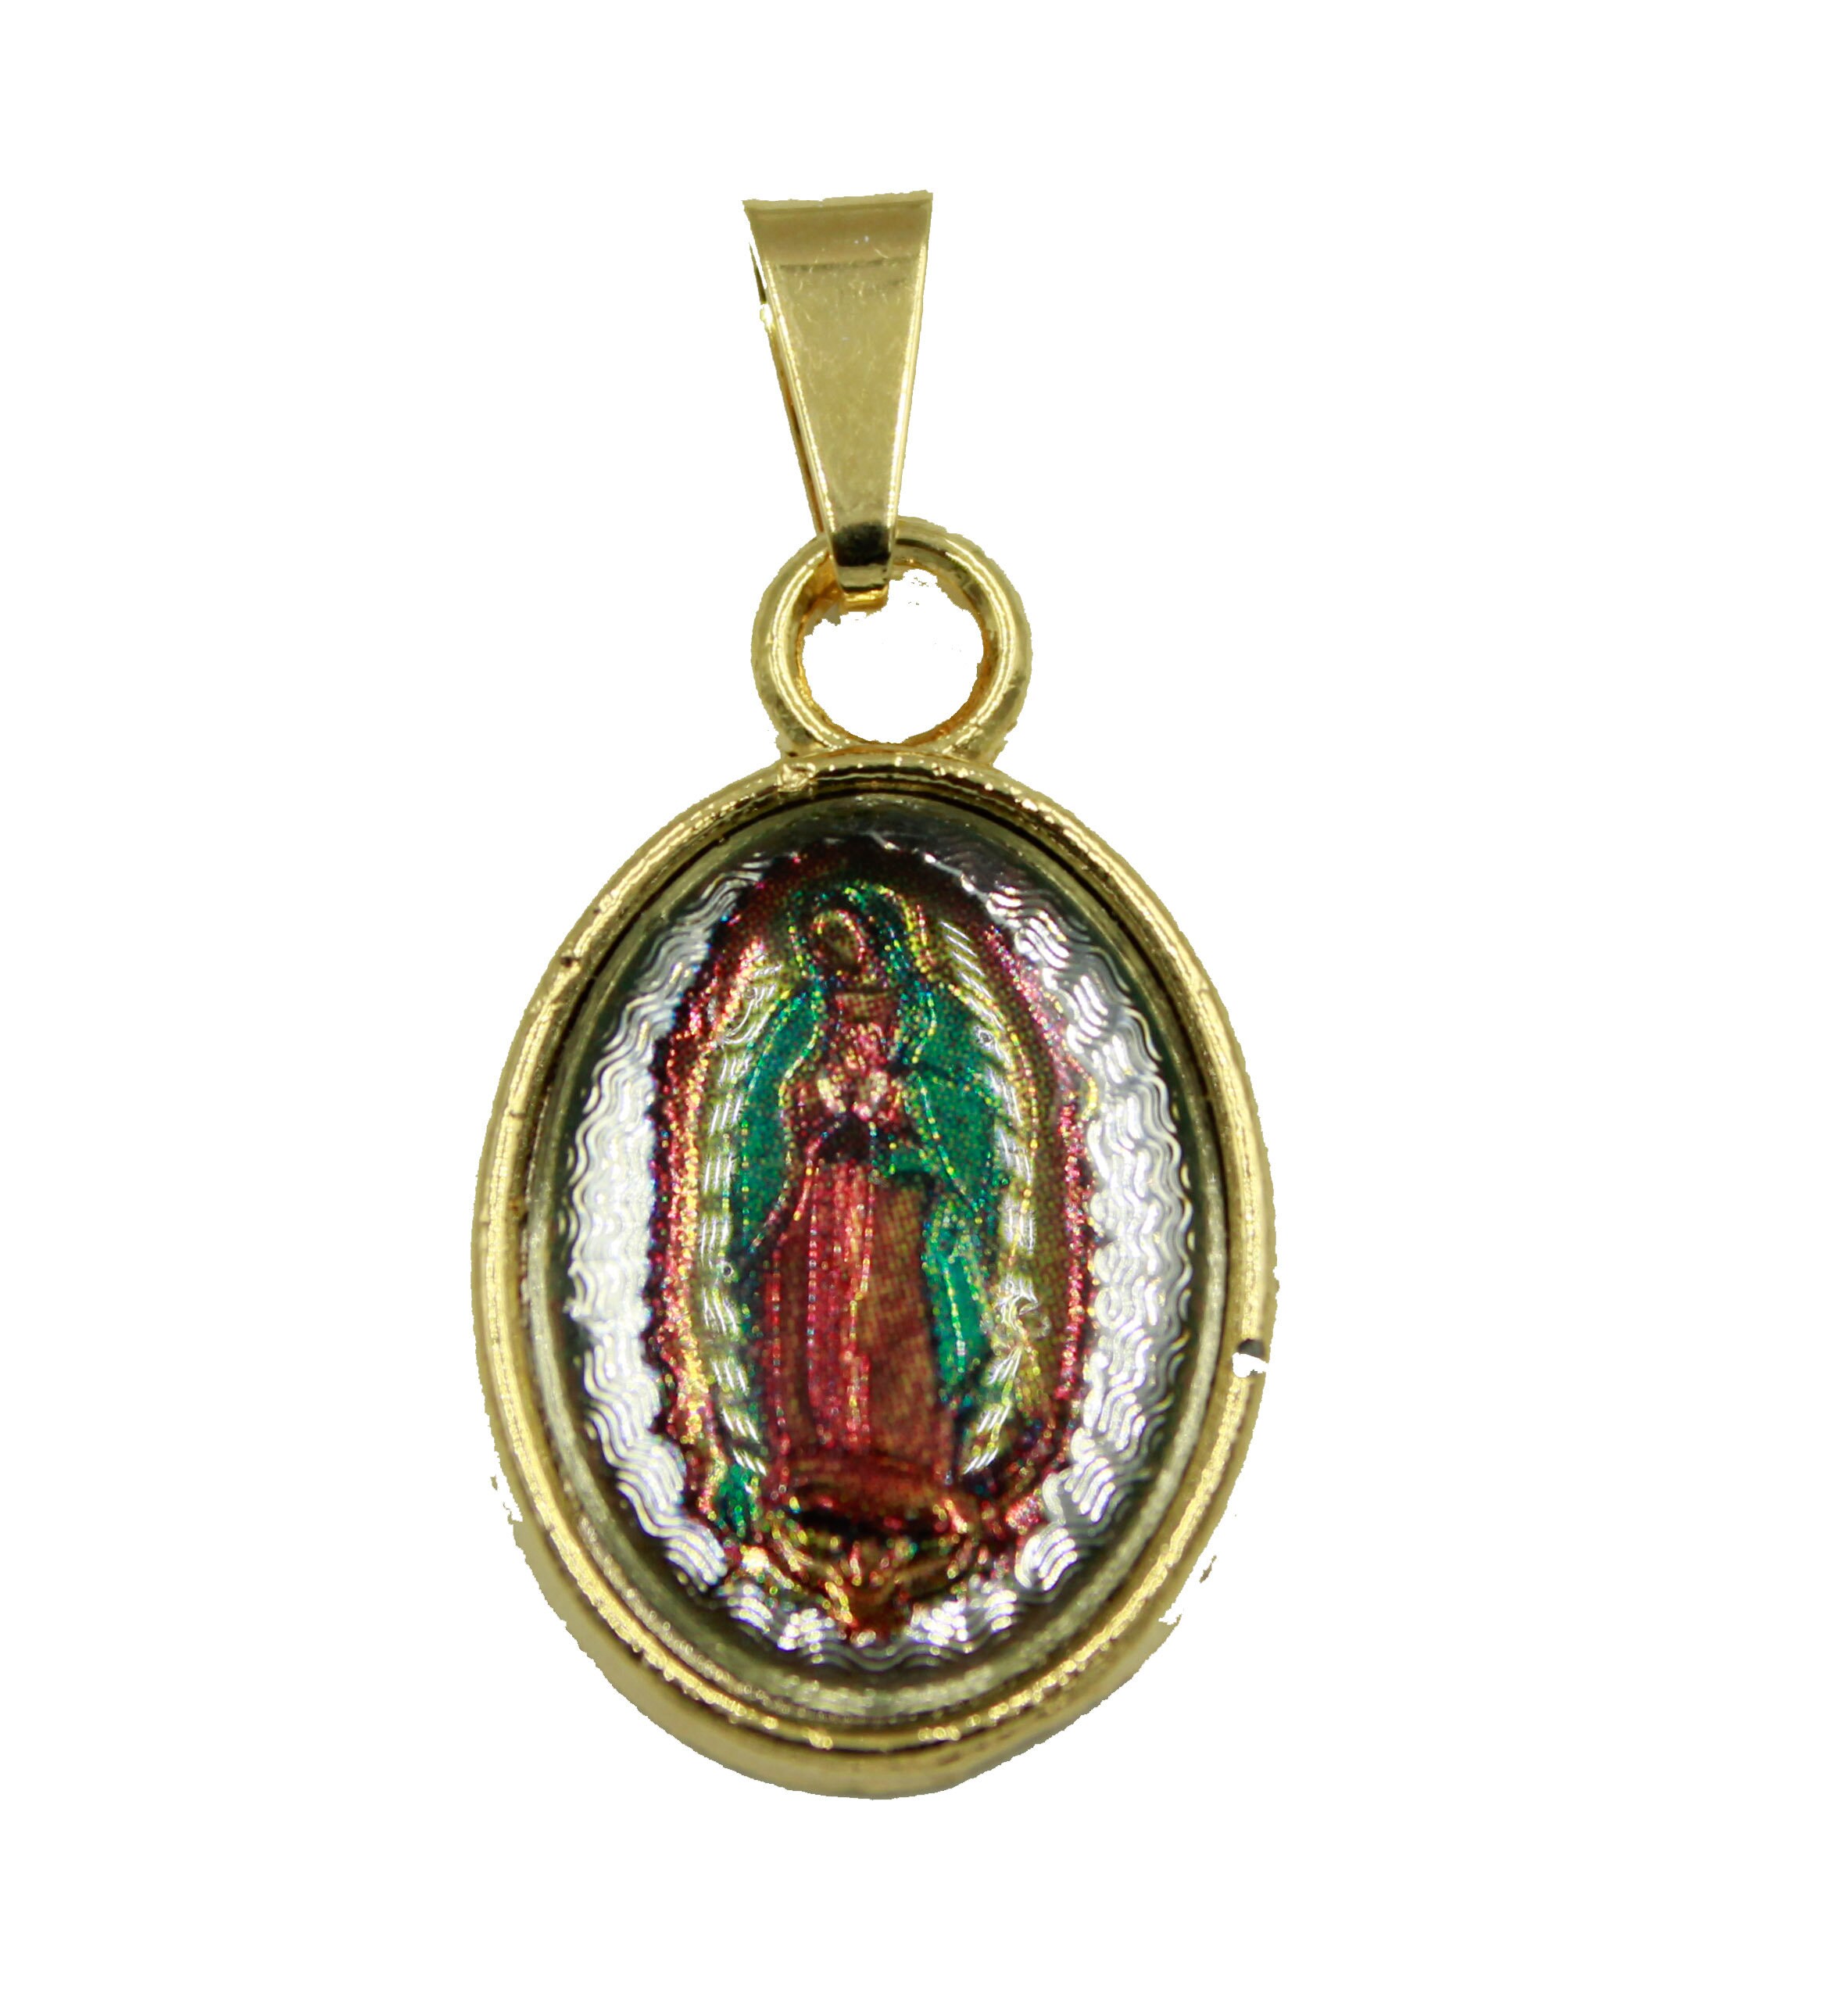 Mini Our Lady of Guadalupe Mother Mary Necklace Virgin Mary 